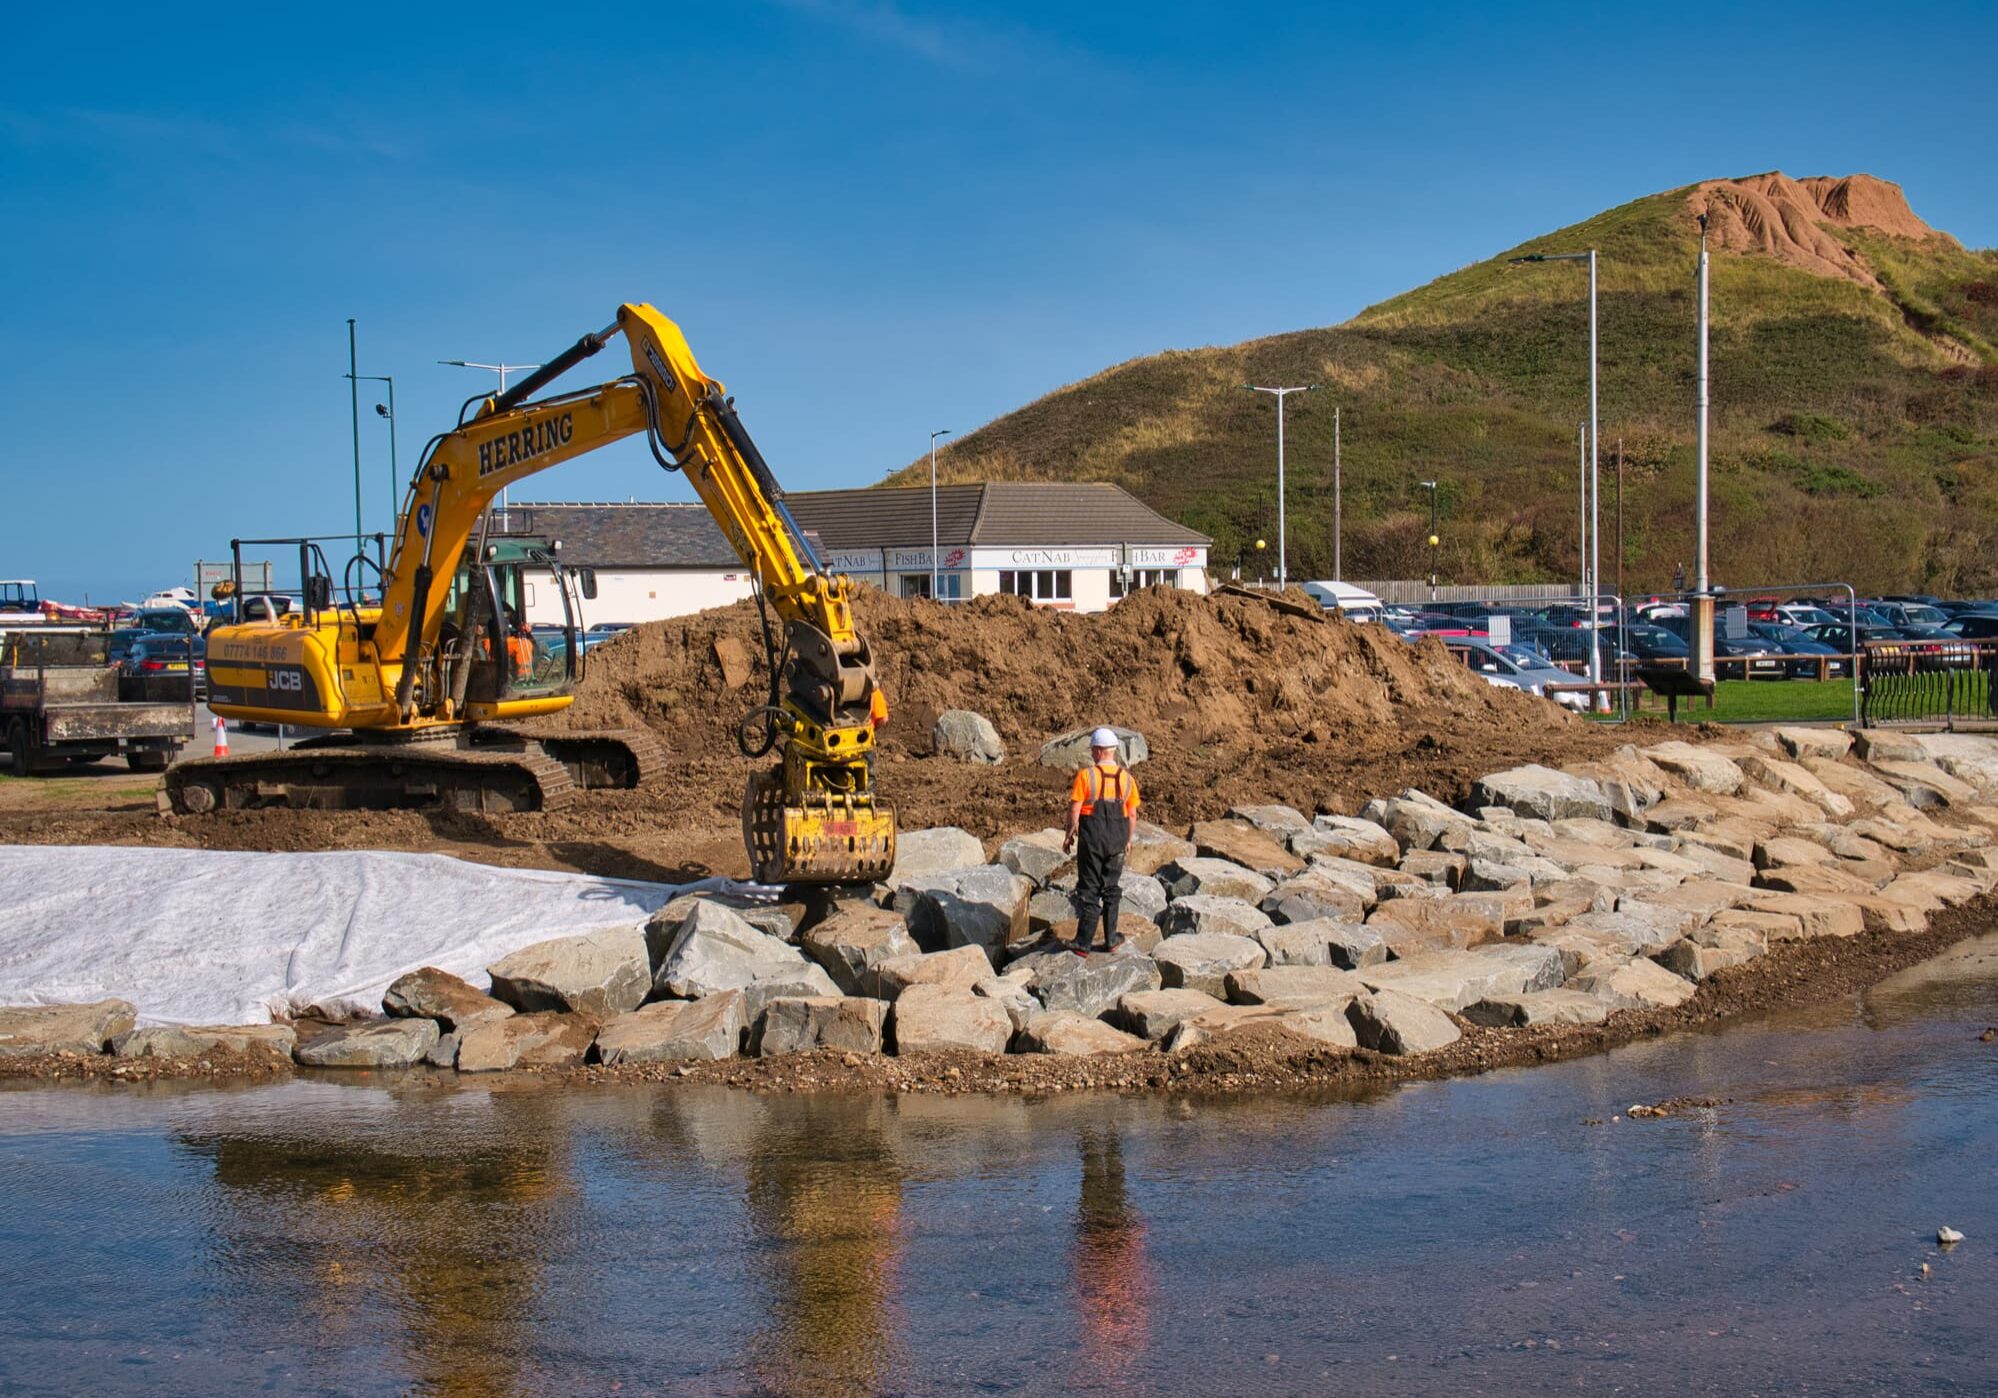 The construction of flood defences along Skelton Beck using heavy earth moving equipment and large stone blocks